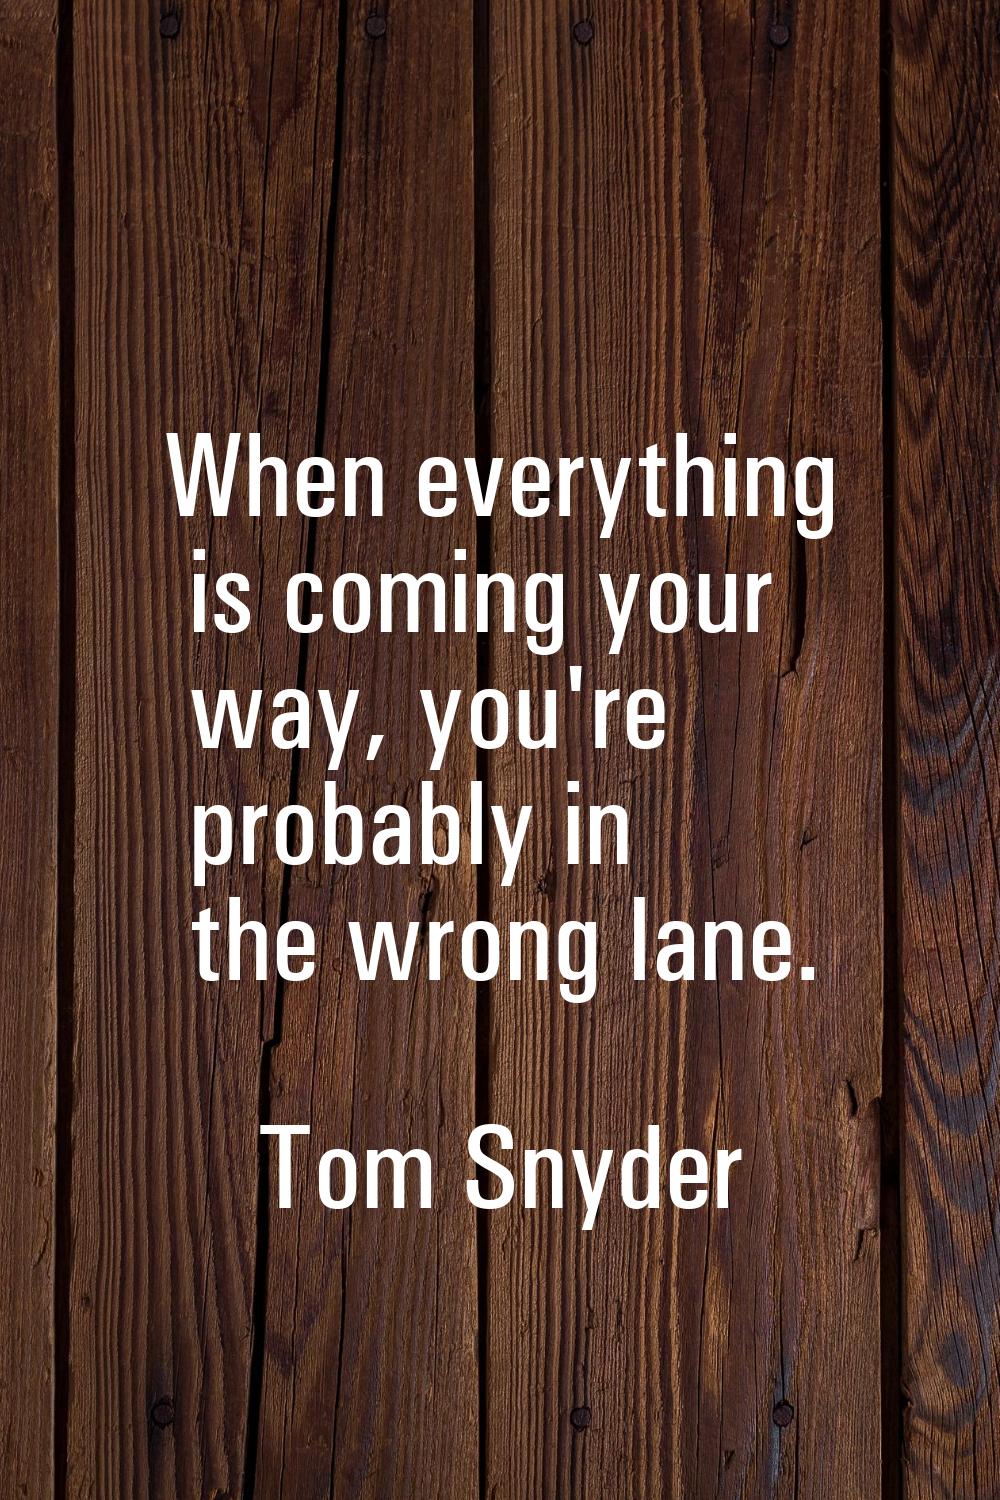 When everything is coming your way, you're probably in the wrong lane.